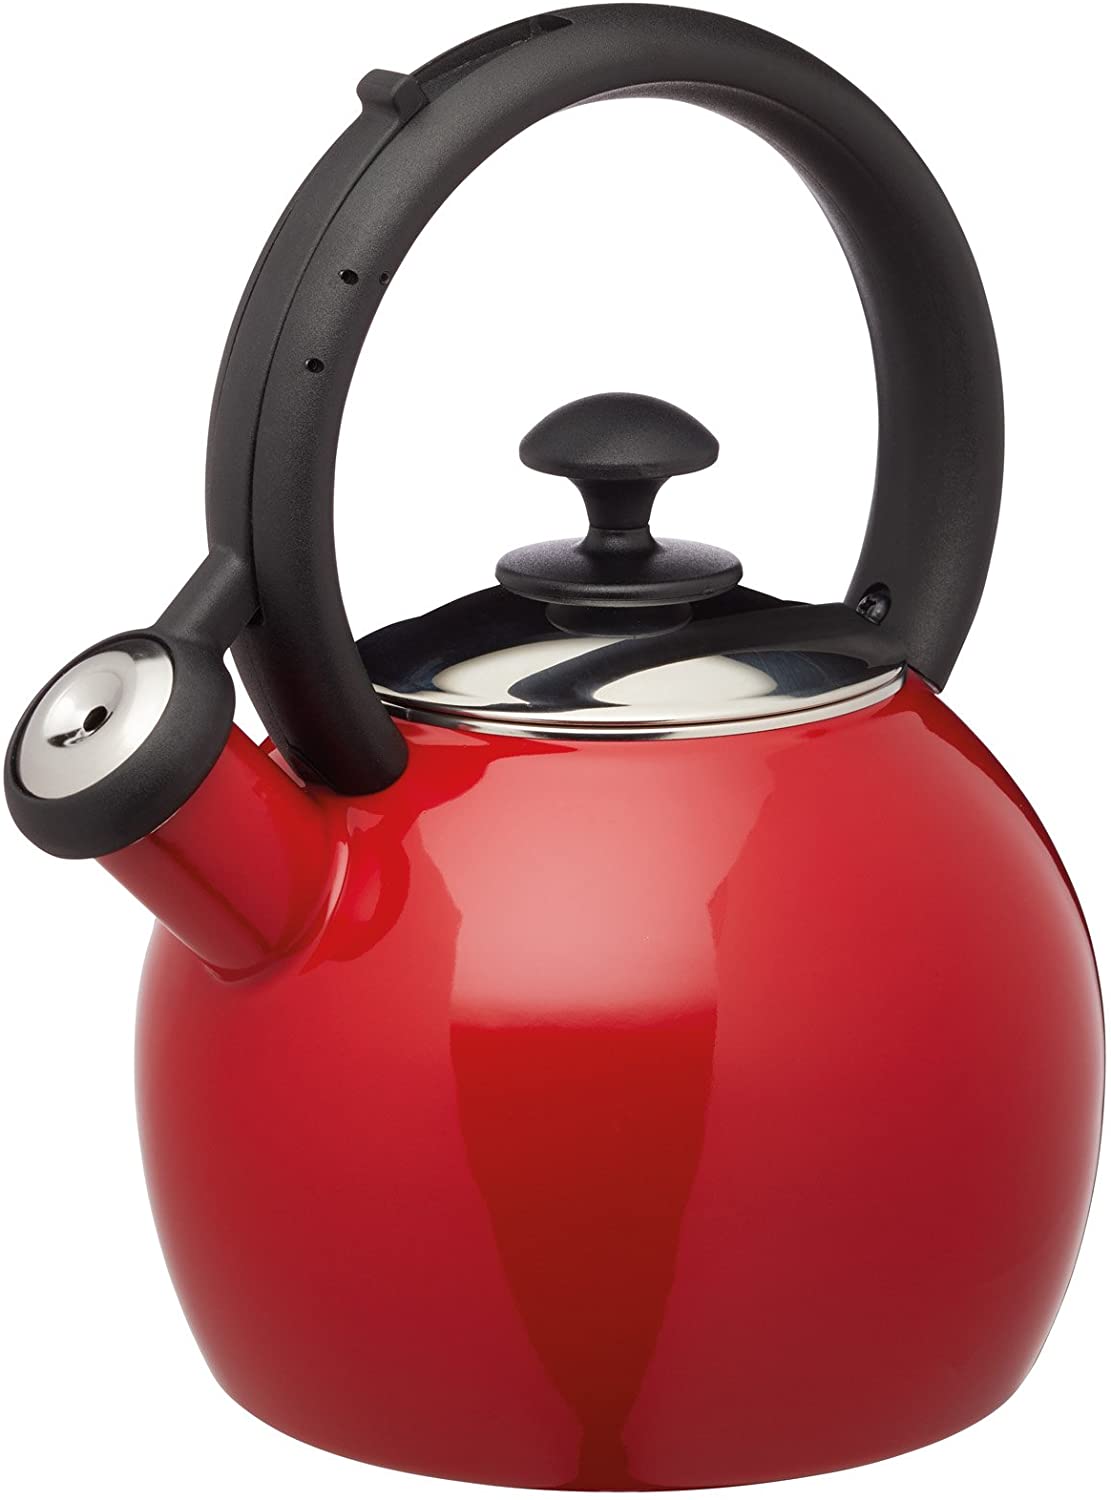 KitchenCraft kclxketenred Whistling Kettle, Red/Black